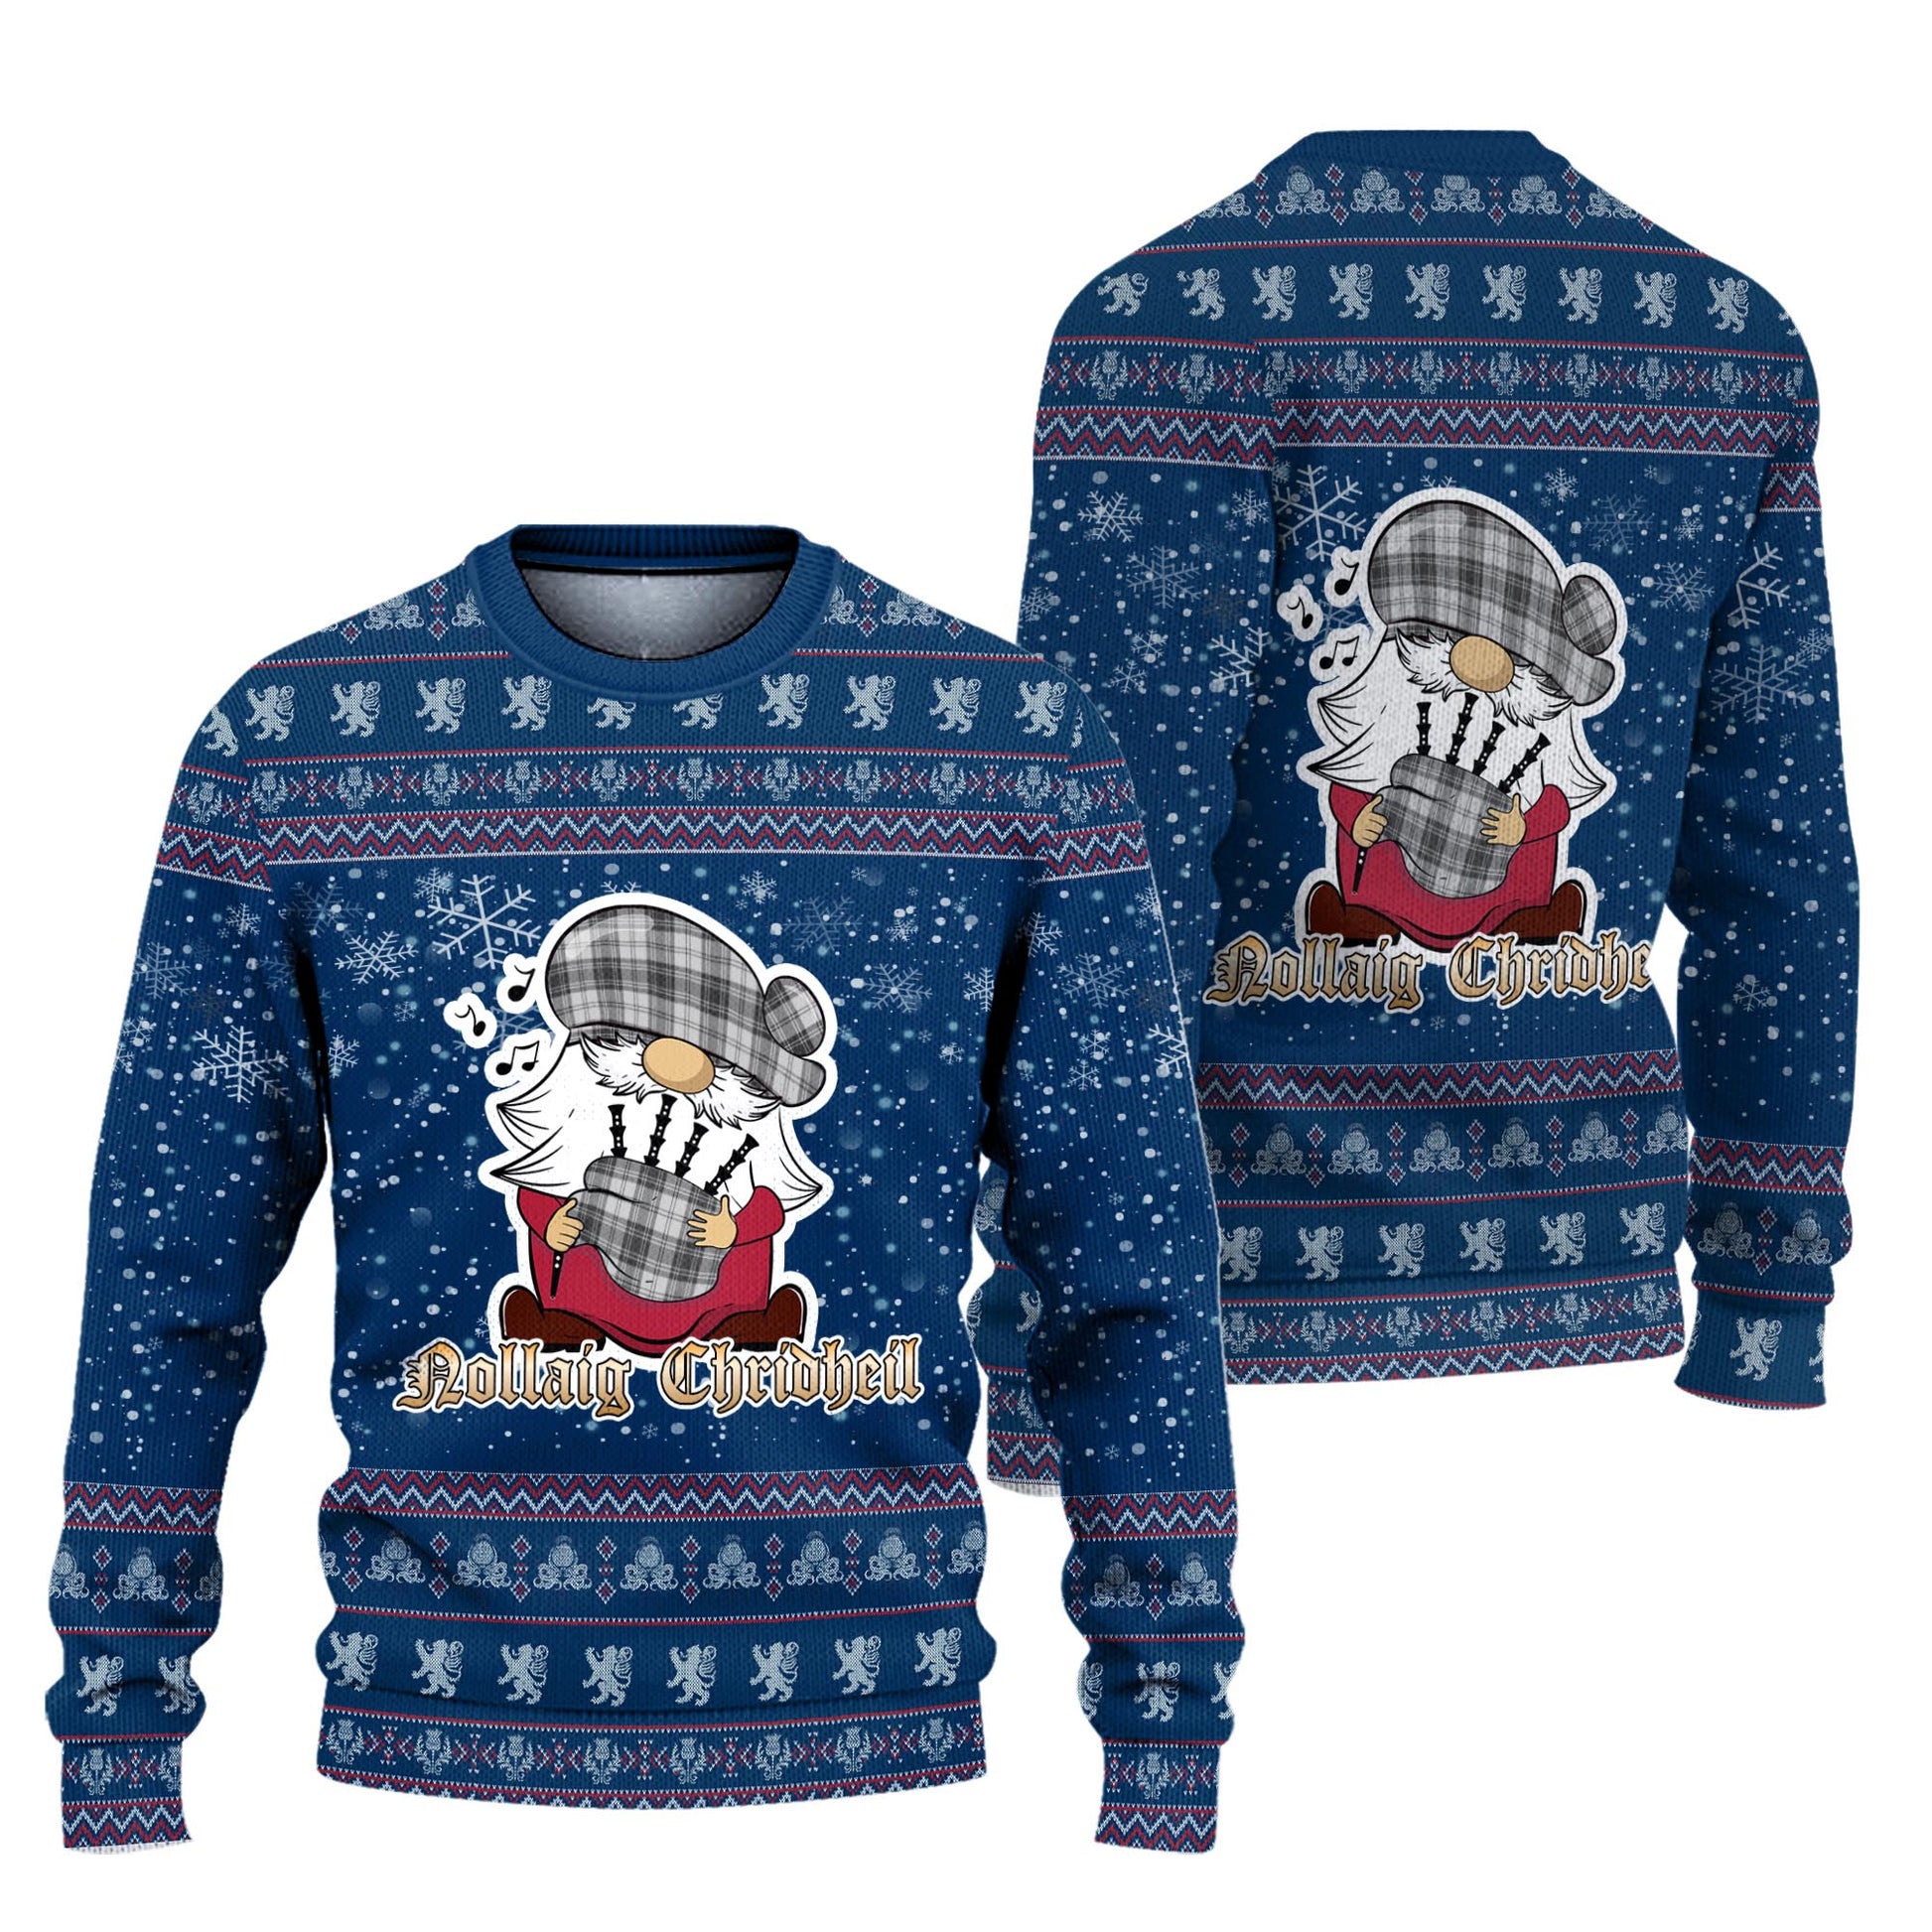 Glendinning Clan Christmas Family Knitted Sweater with Funny Gnome Playing Bagpipes Unisex Blue - Tartanvibesclothing